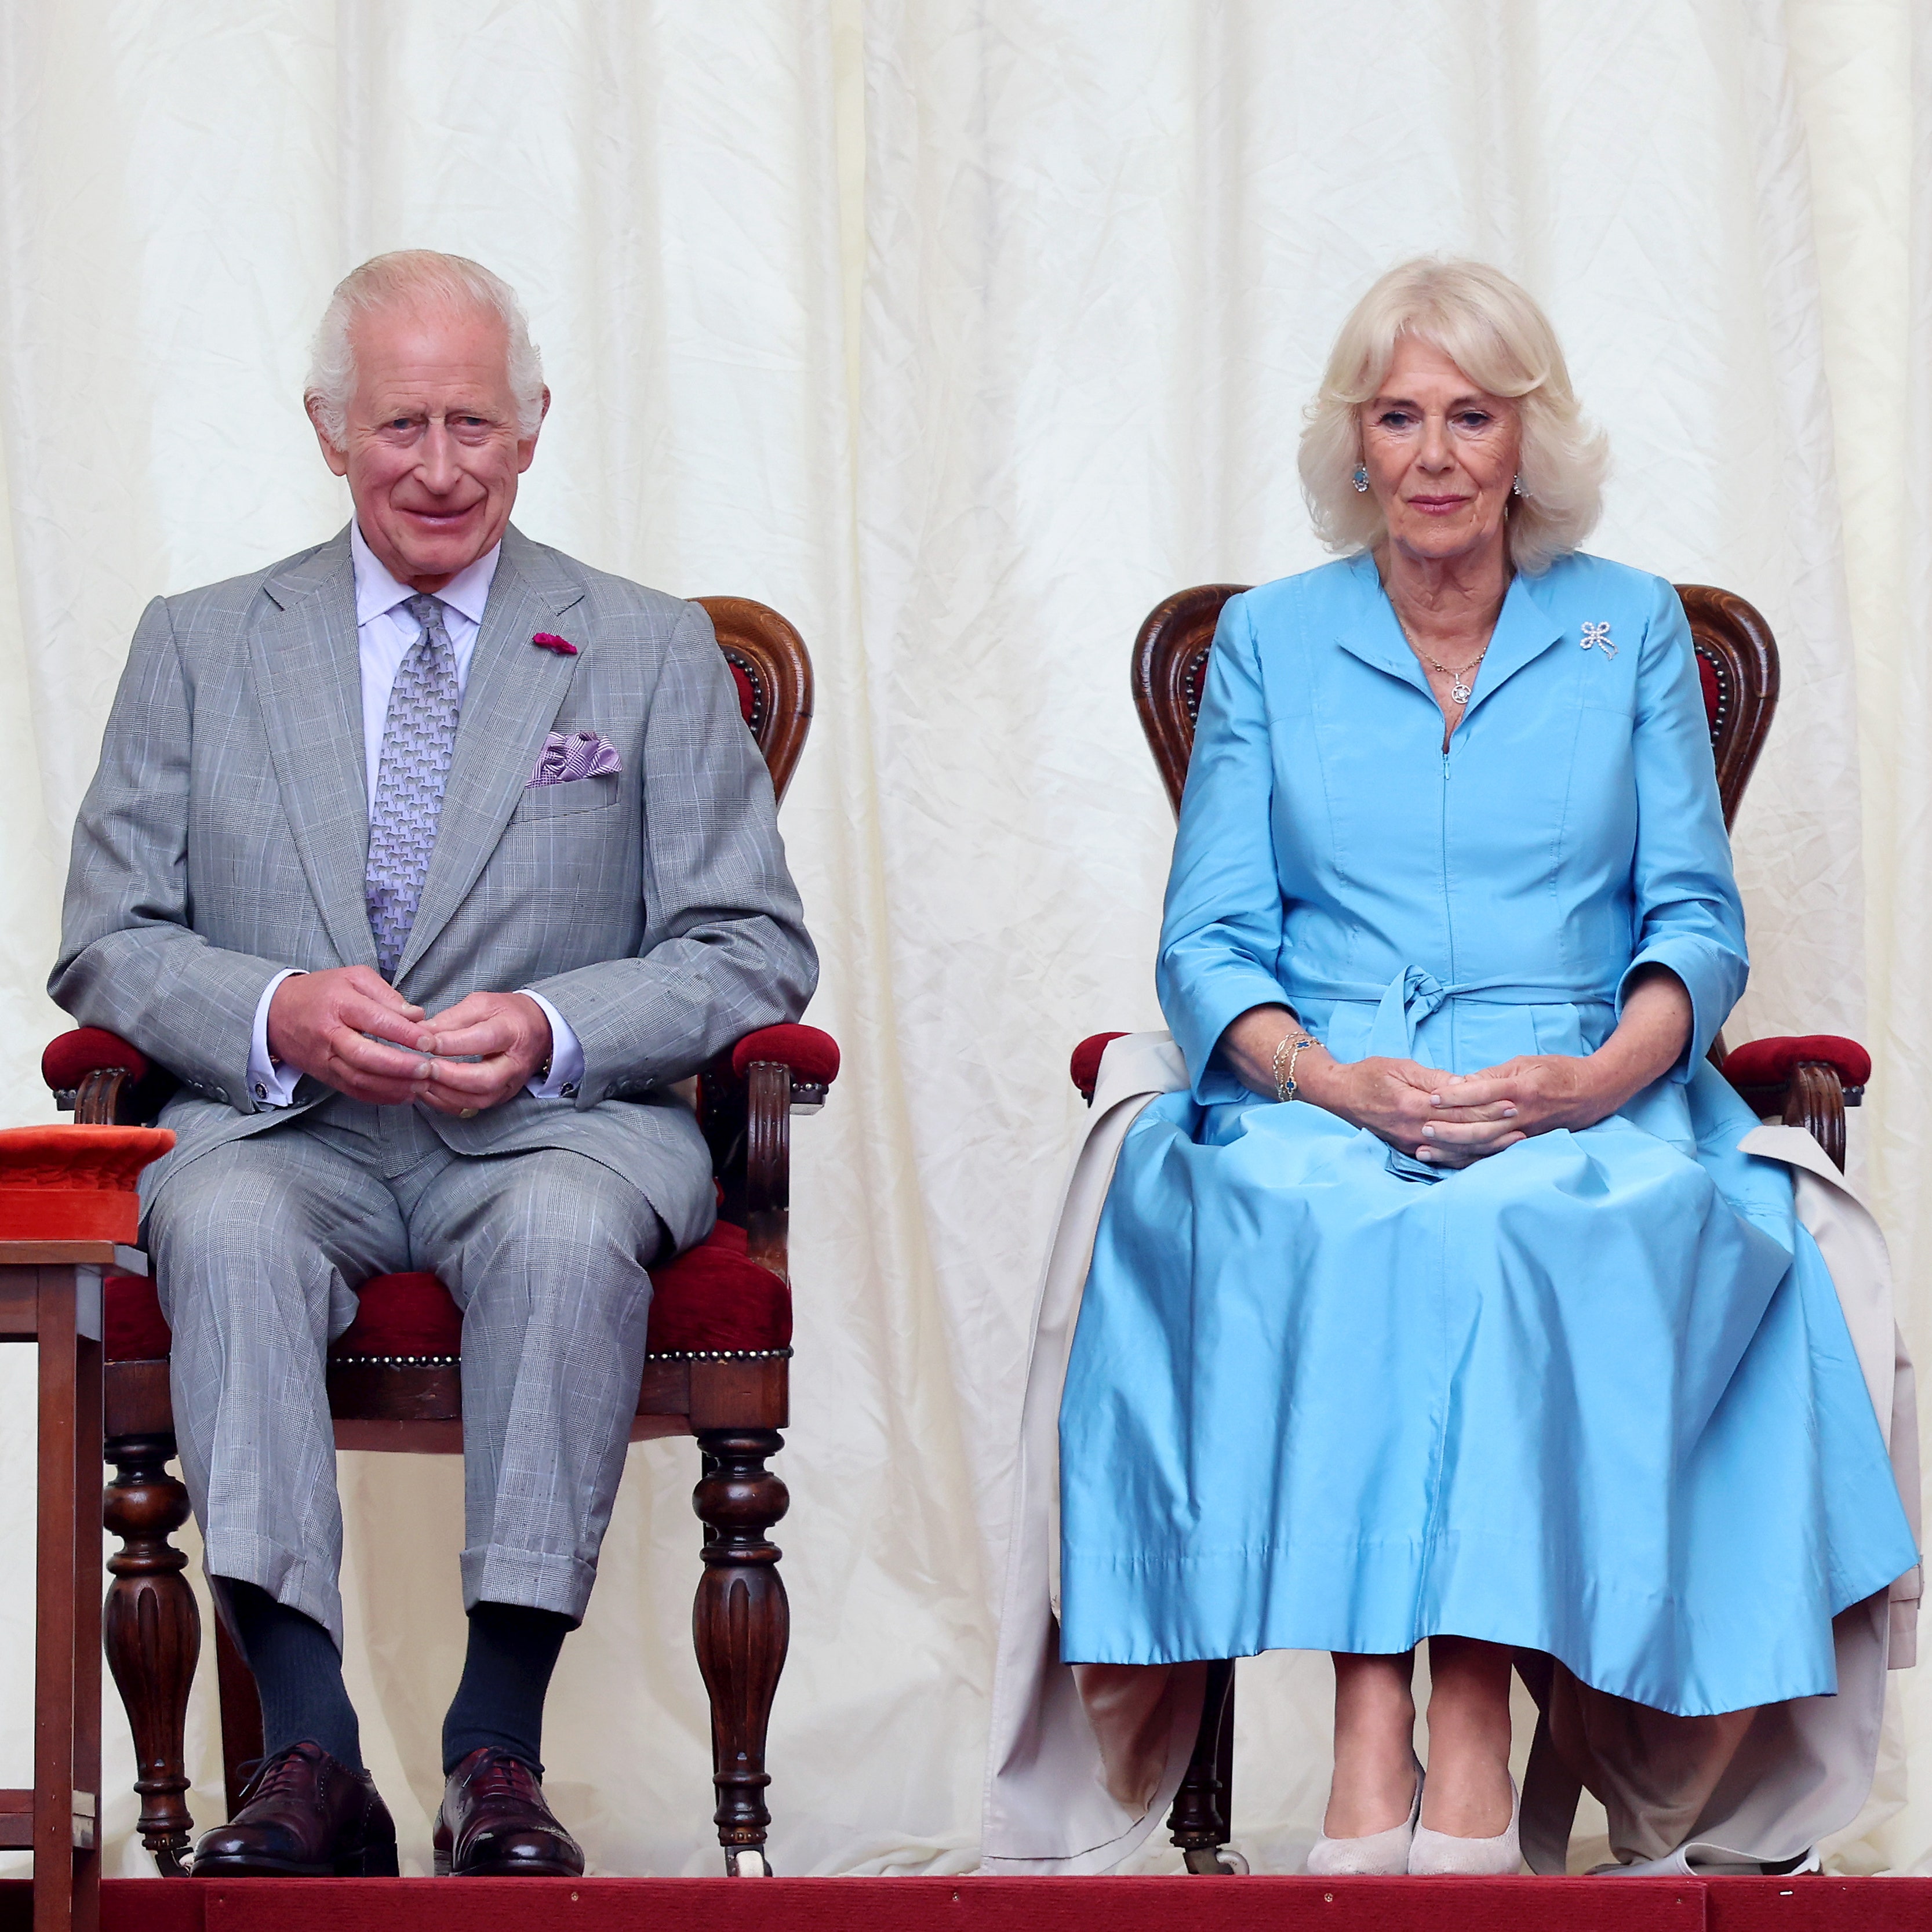 Security 'concern' disrupts King and Queen's visit to Jersey